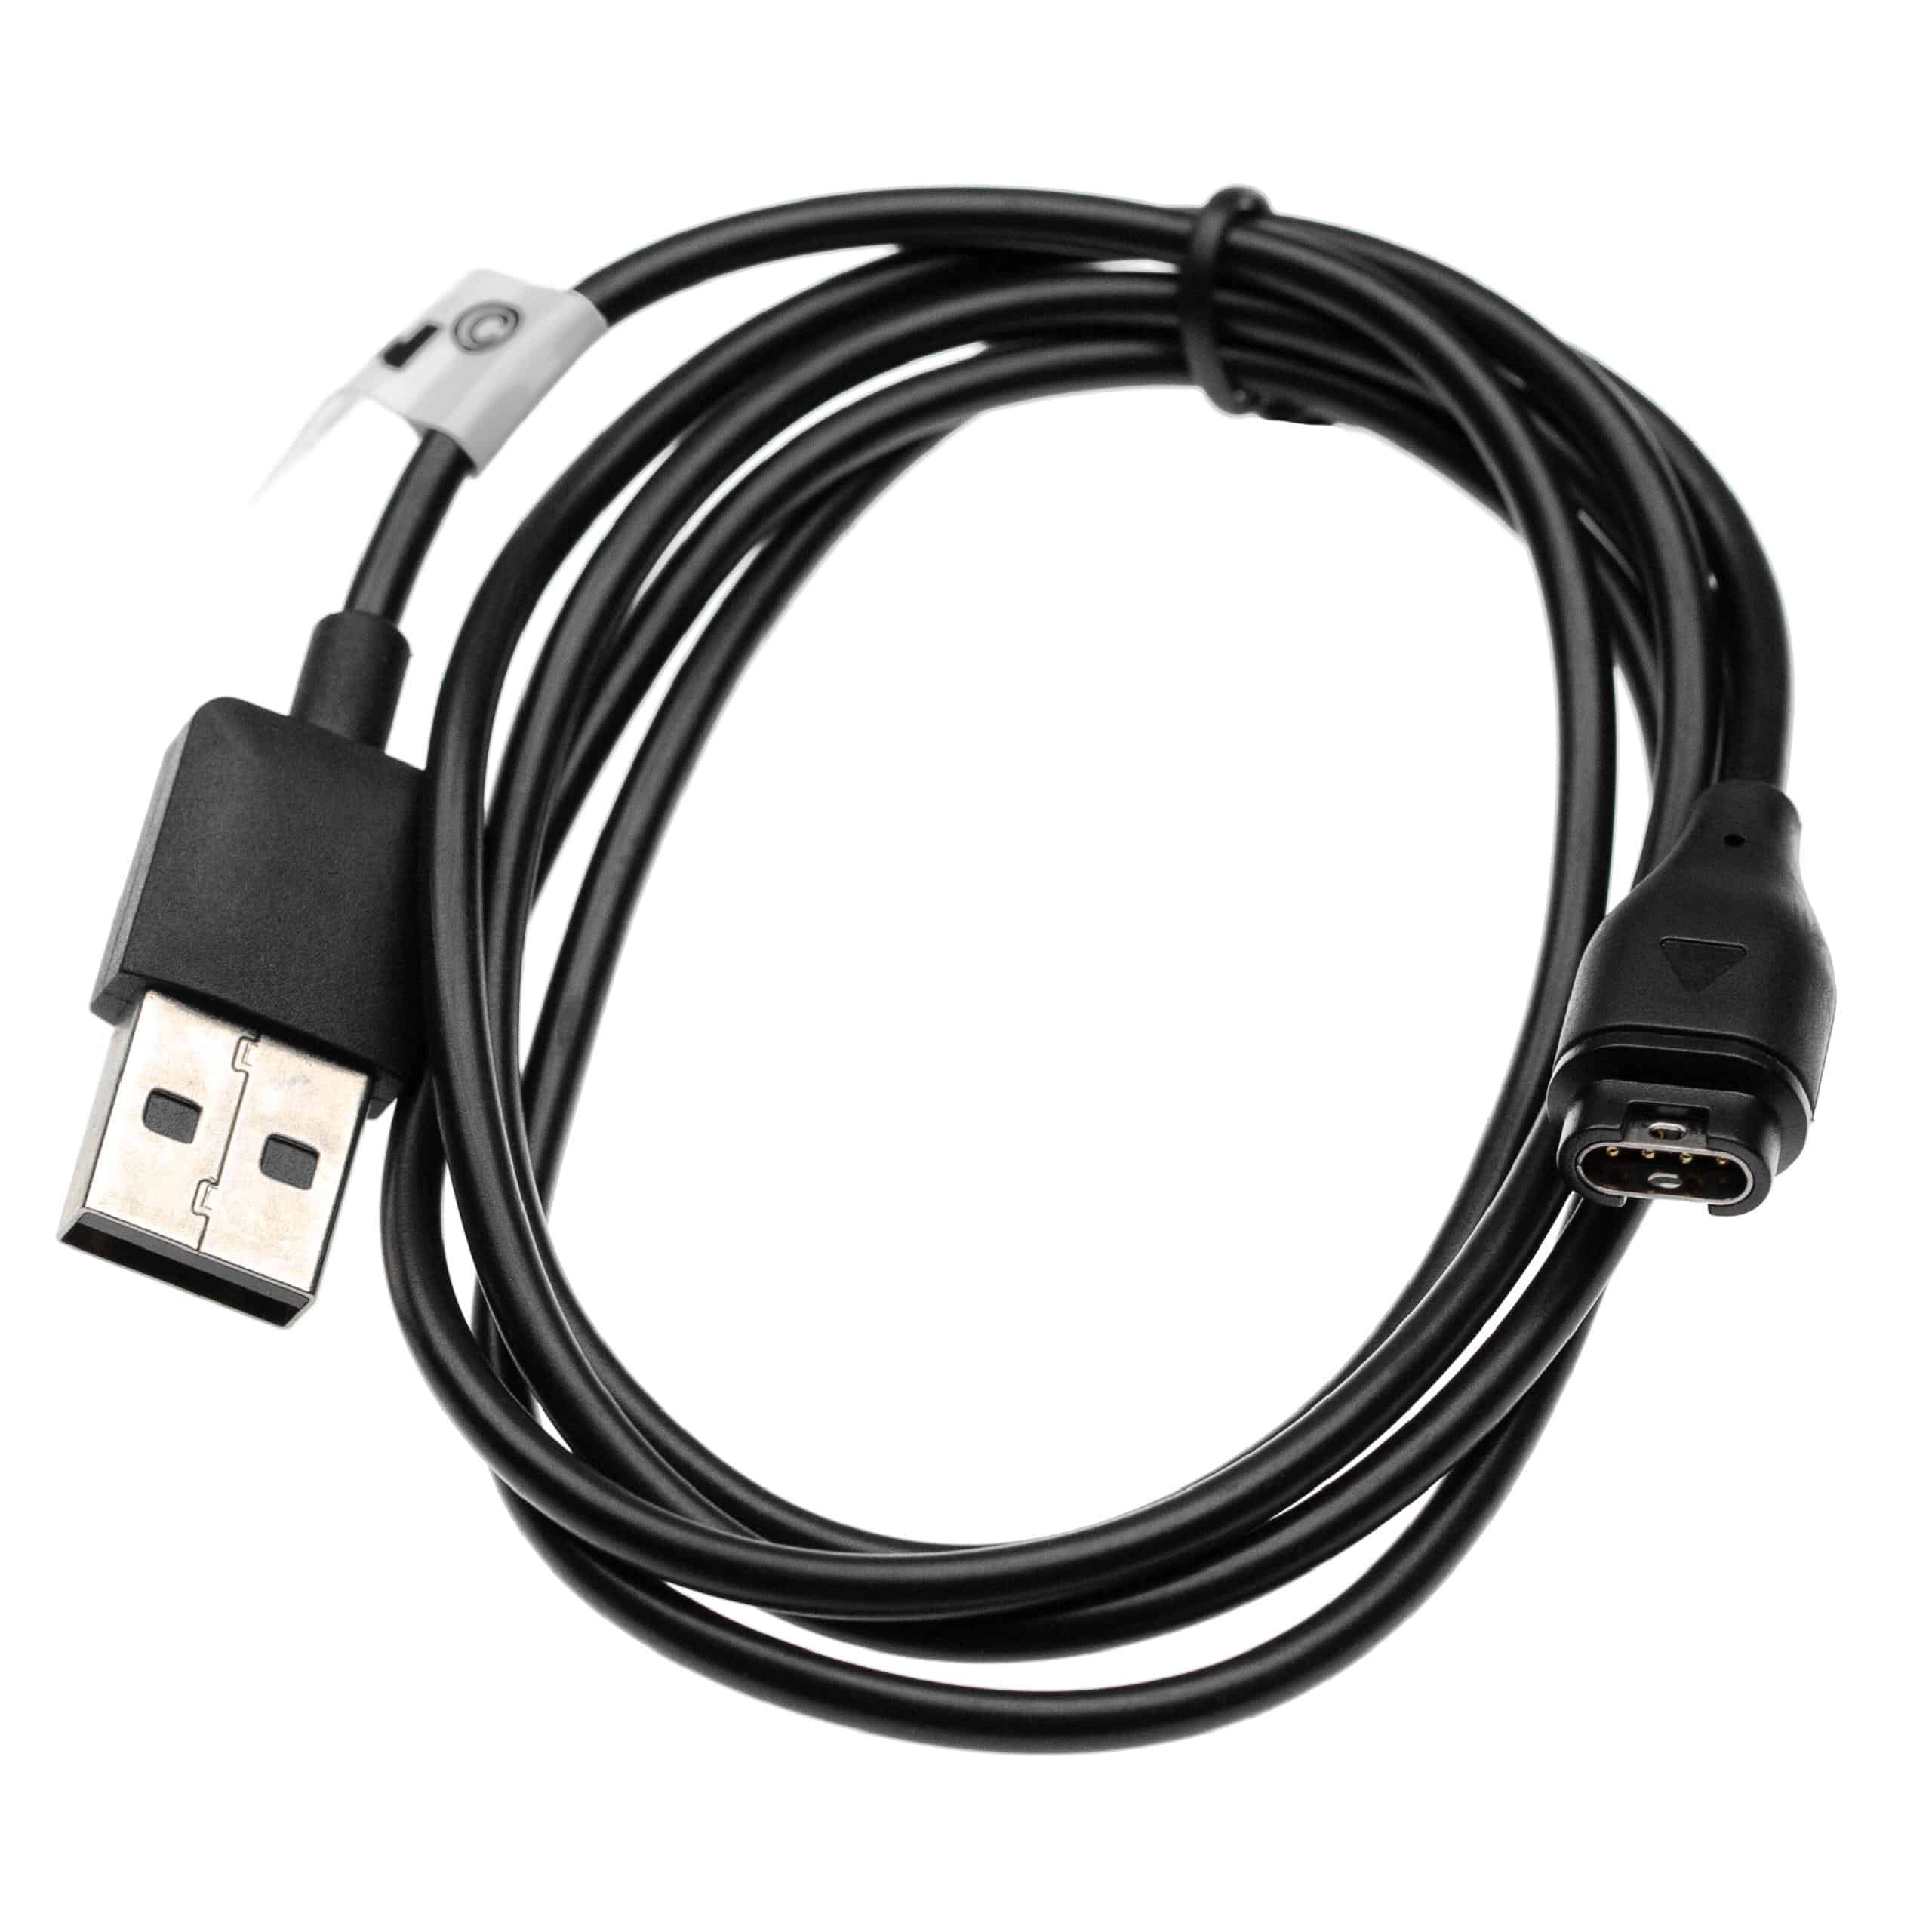 Charging Cable suitable for Fitness Tracker - Micro USB Cable, 100cm, black